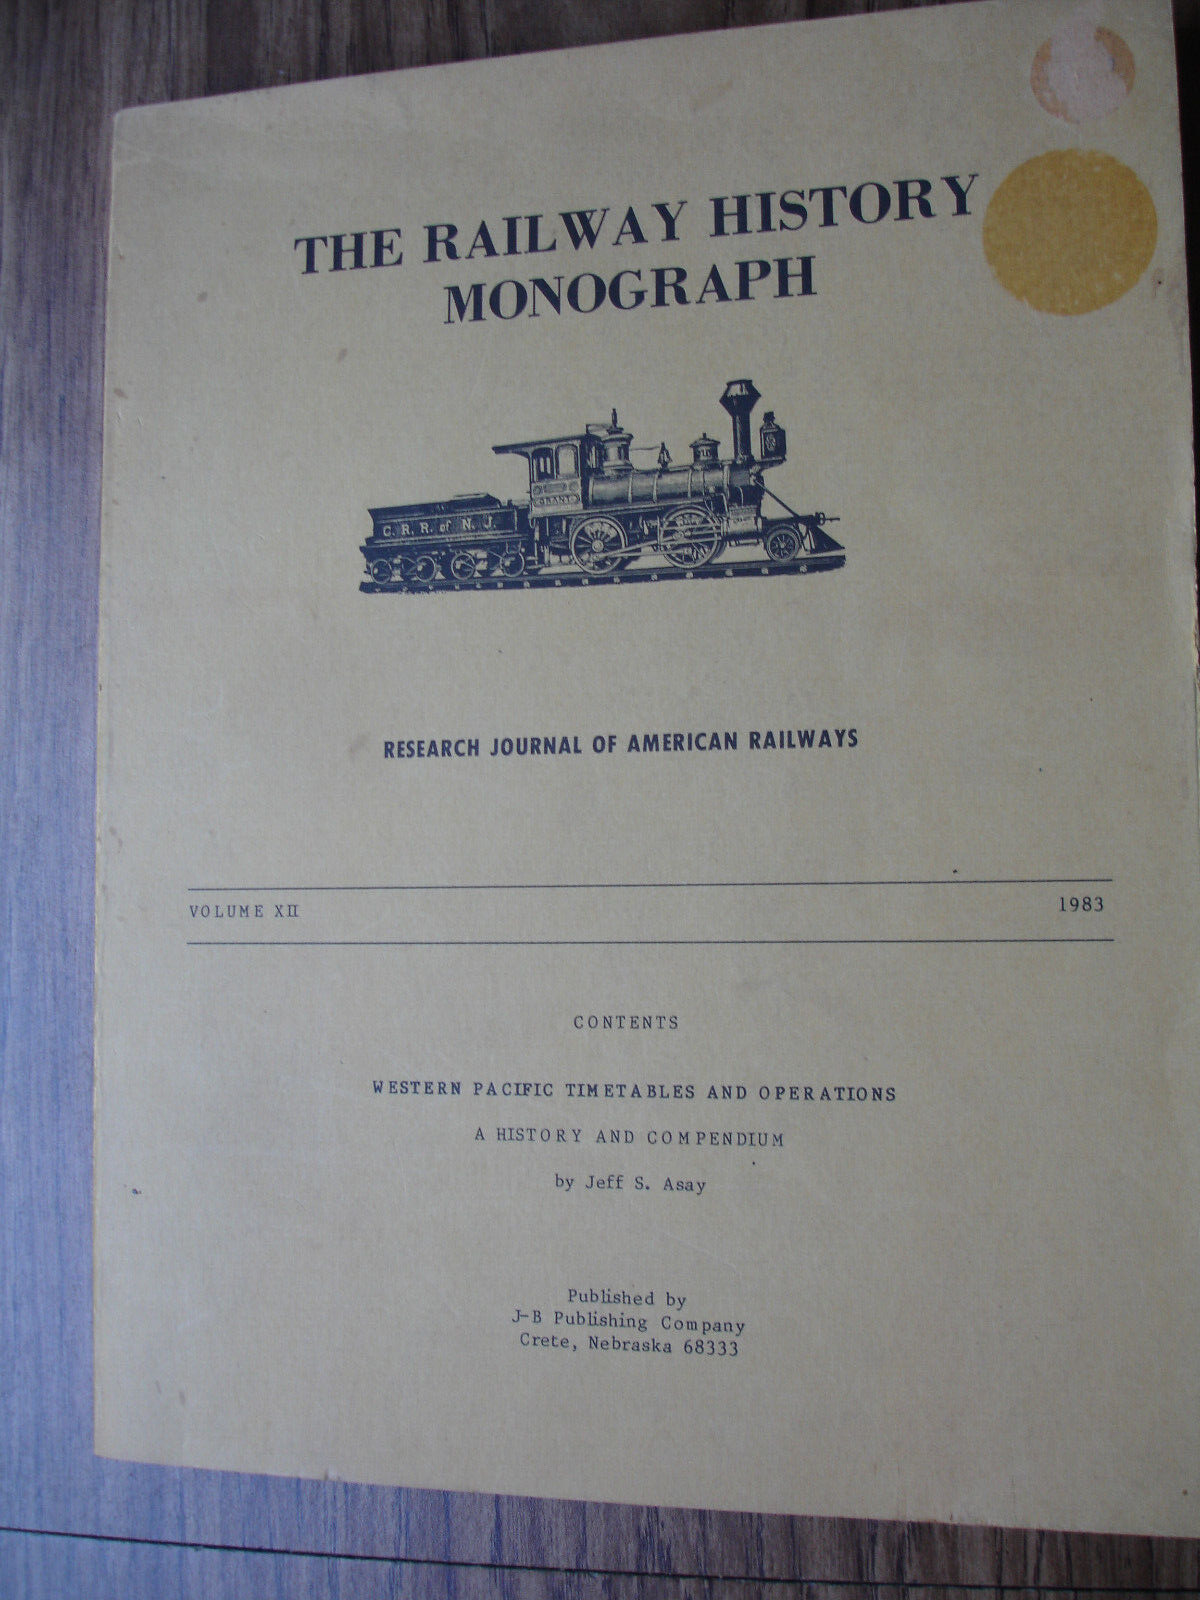 The Railway History Monograph by Jeff S. Asay